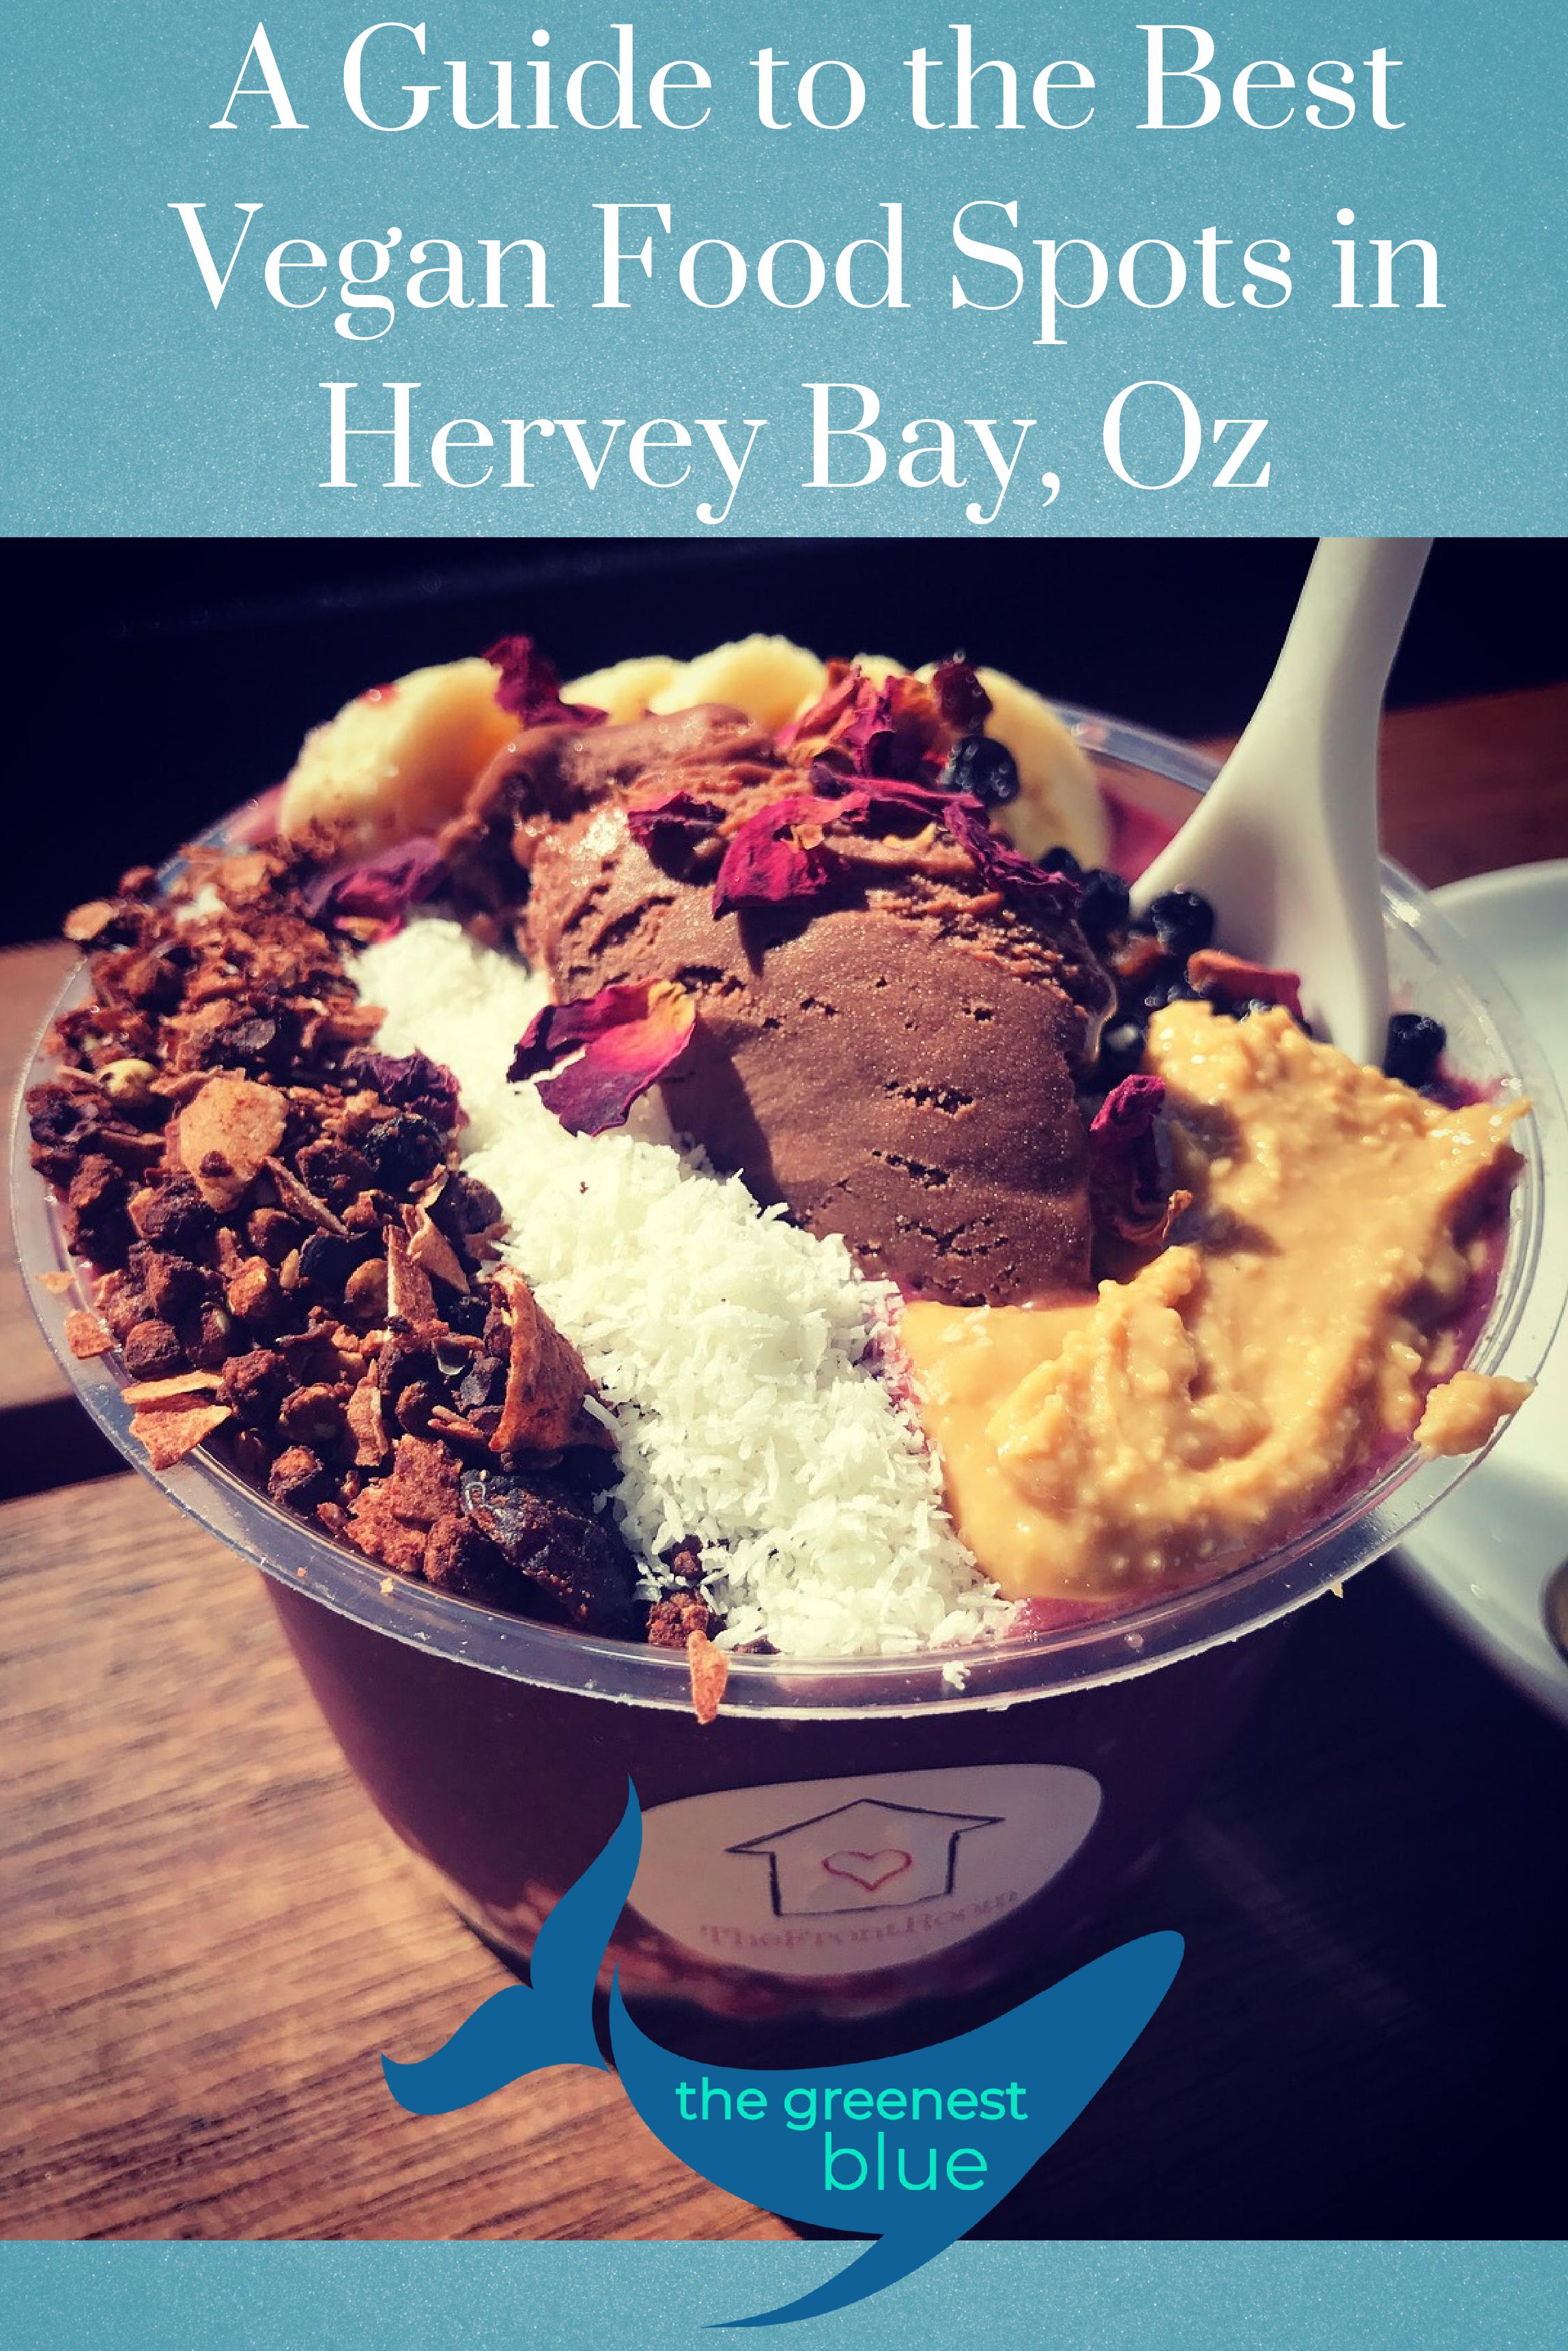 A Guide To The Best Vegan Food Spots In Hervey Bay